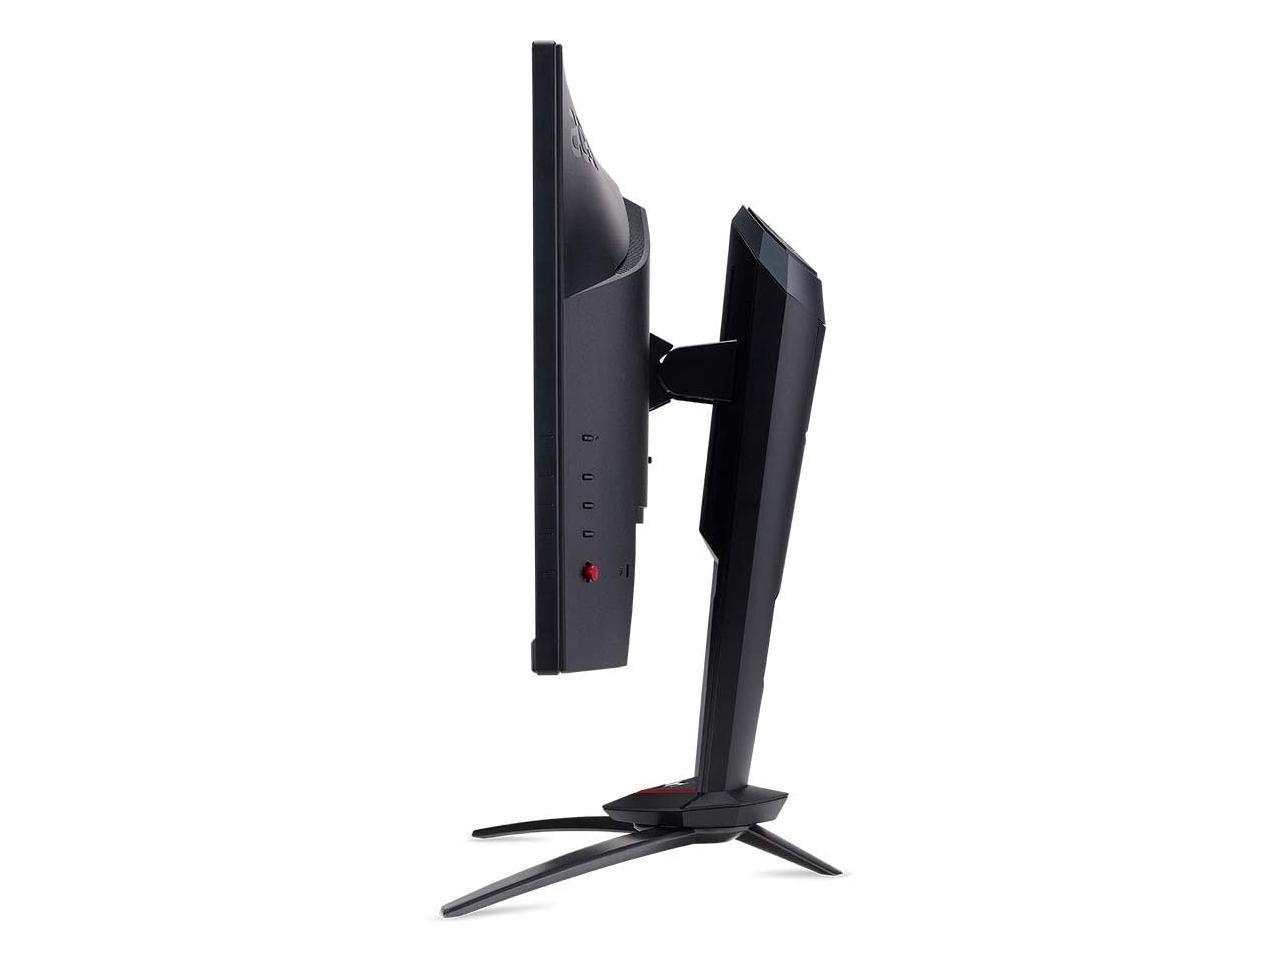 Acer Predator XB273 Xbmiprzx 27" FHD (1920 x 1080) IPS NVIDIA G-SYNC Gaming Monitor with Up to 0.1ms (G to G), 240Hz, 99% sRGB (1 x Display Port & 1 x HDMI Port), Black